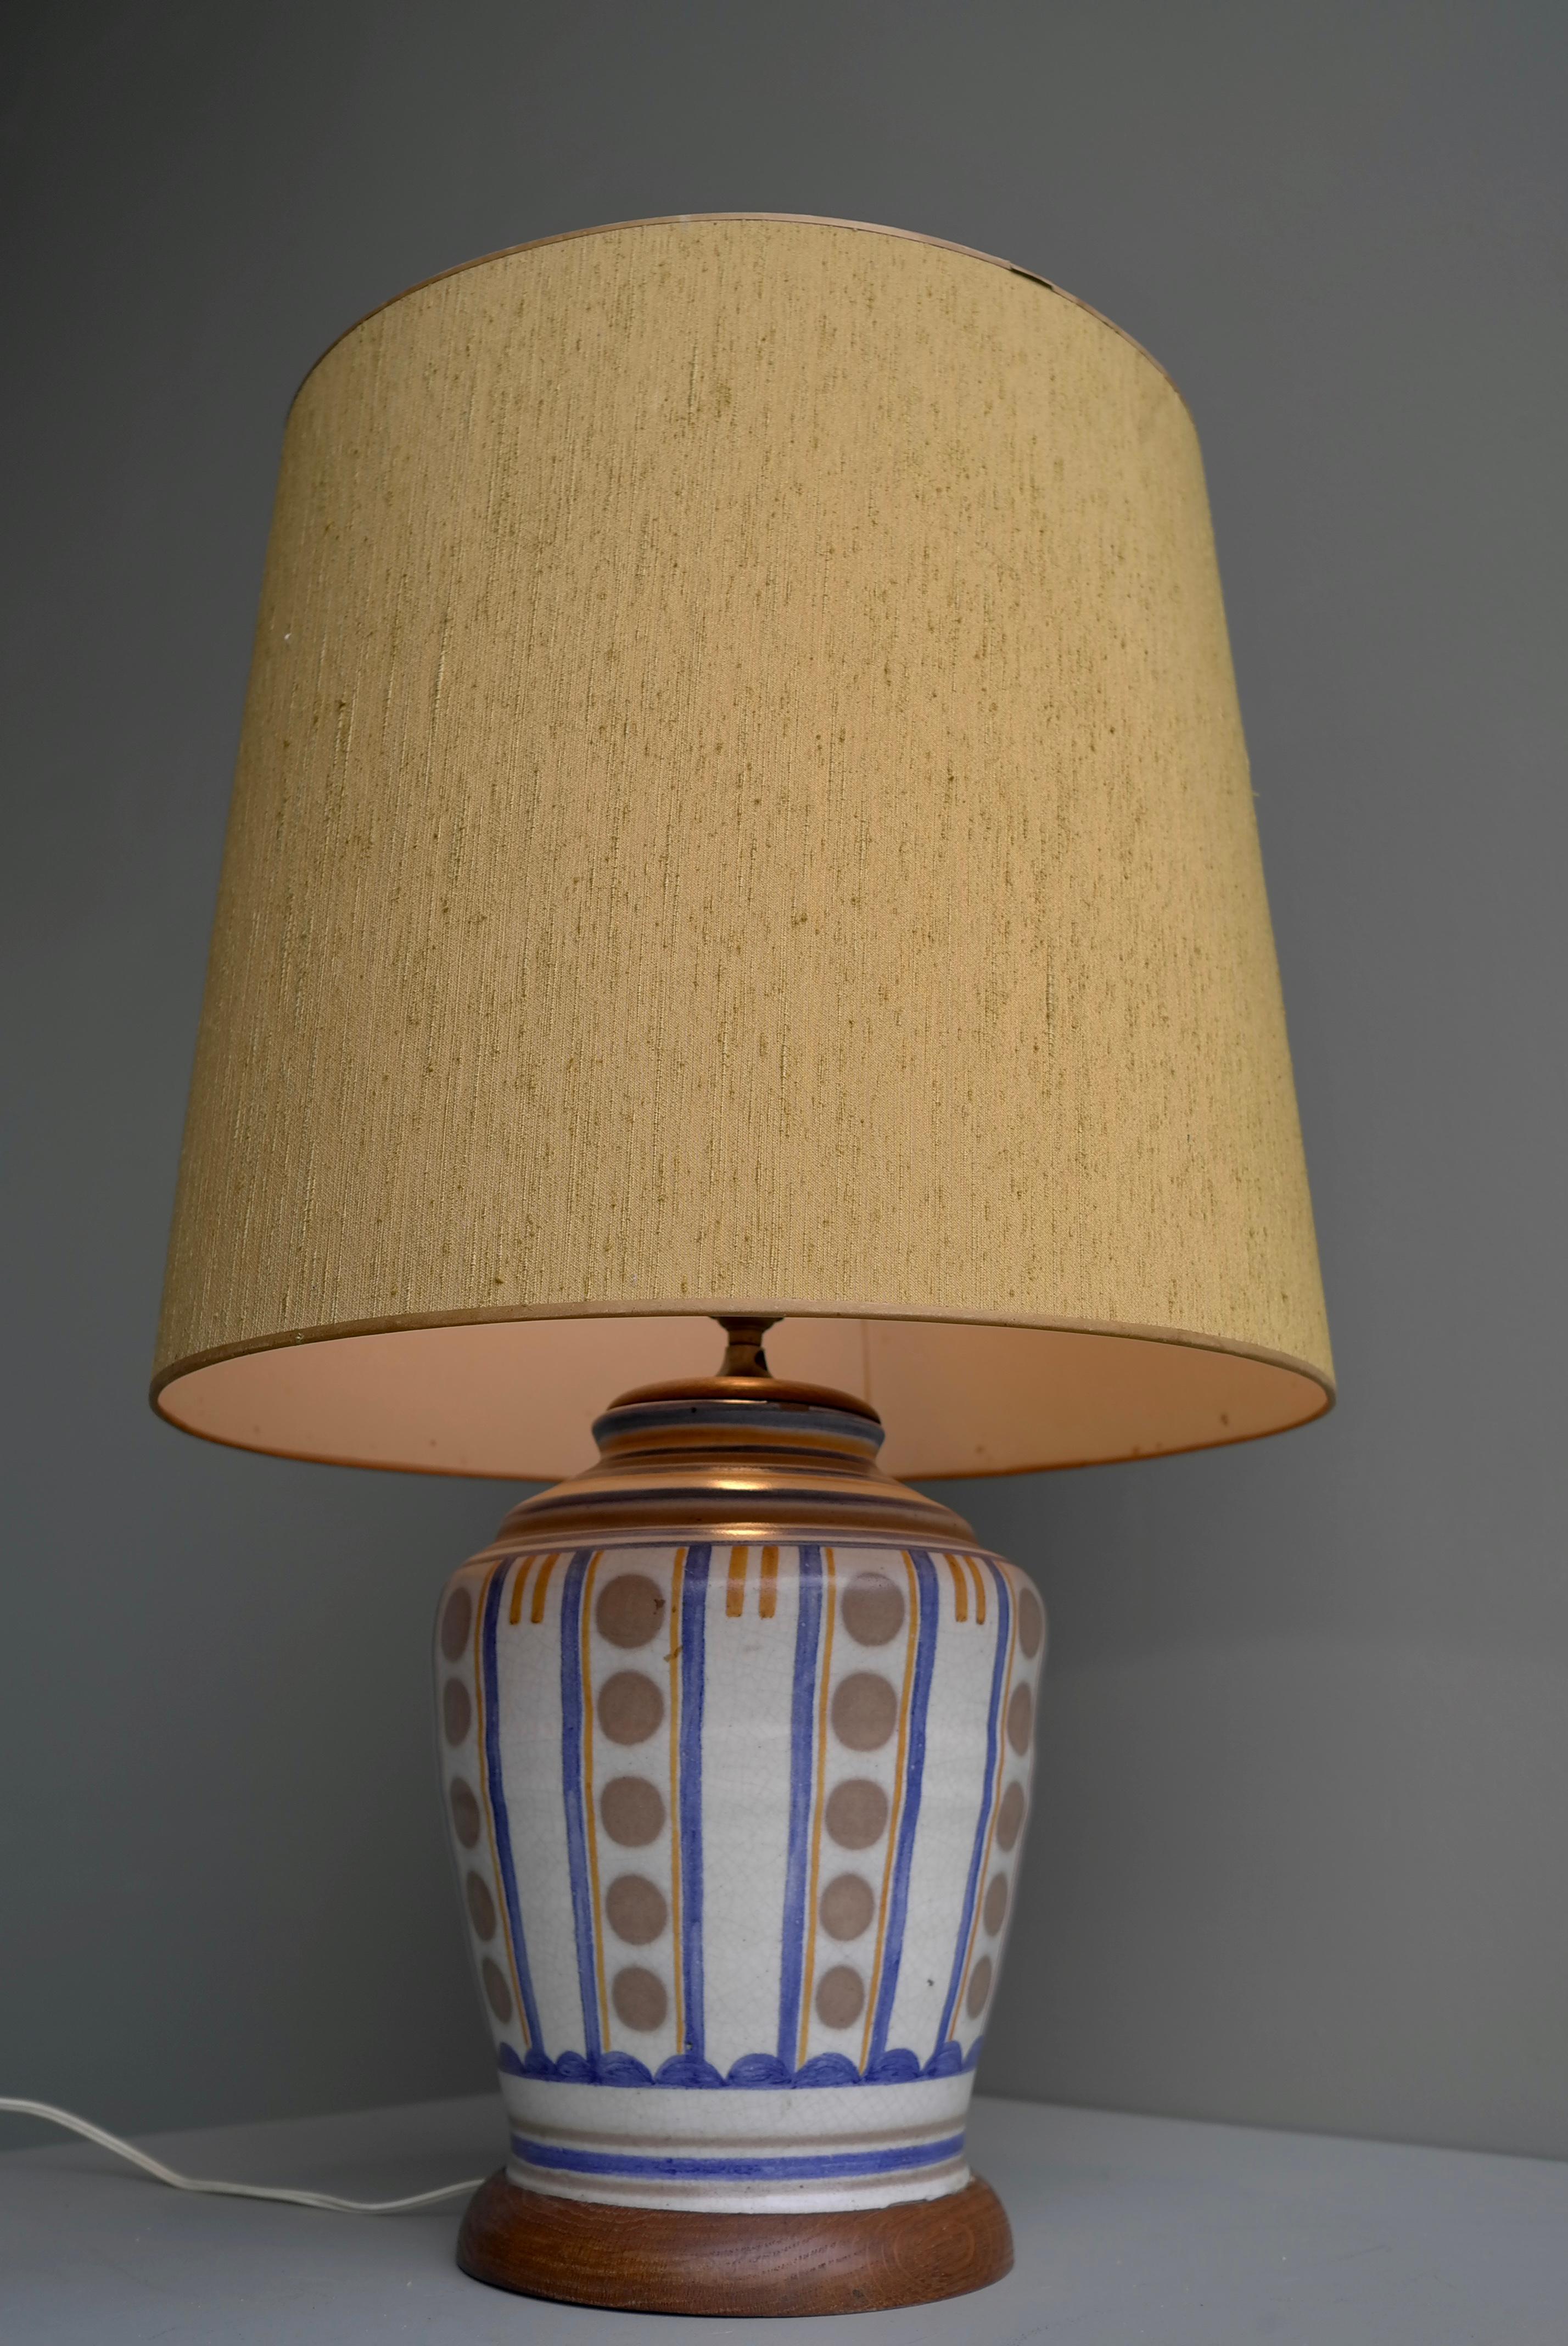 Mid-20th Century Art Deco French Ceramic and Wood Table Lamp with Silk Lampshade, France, 1940s For Sale